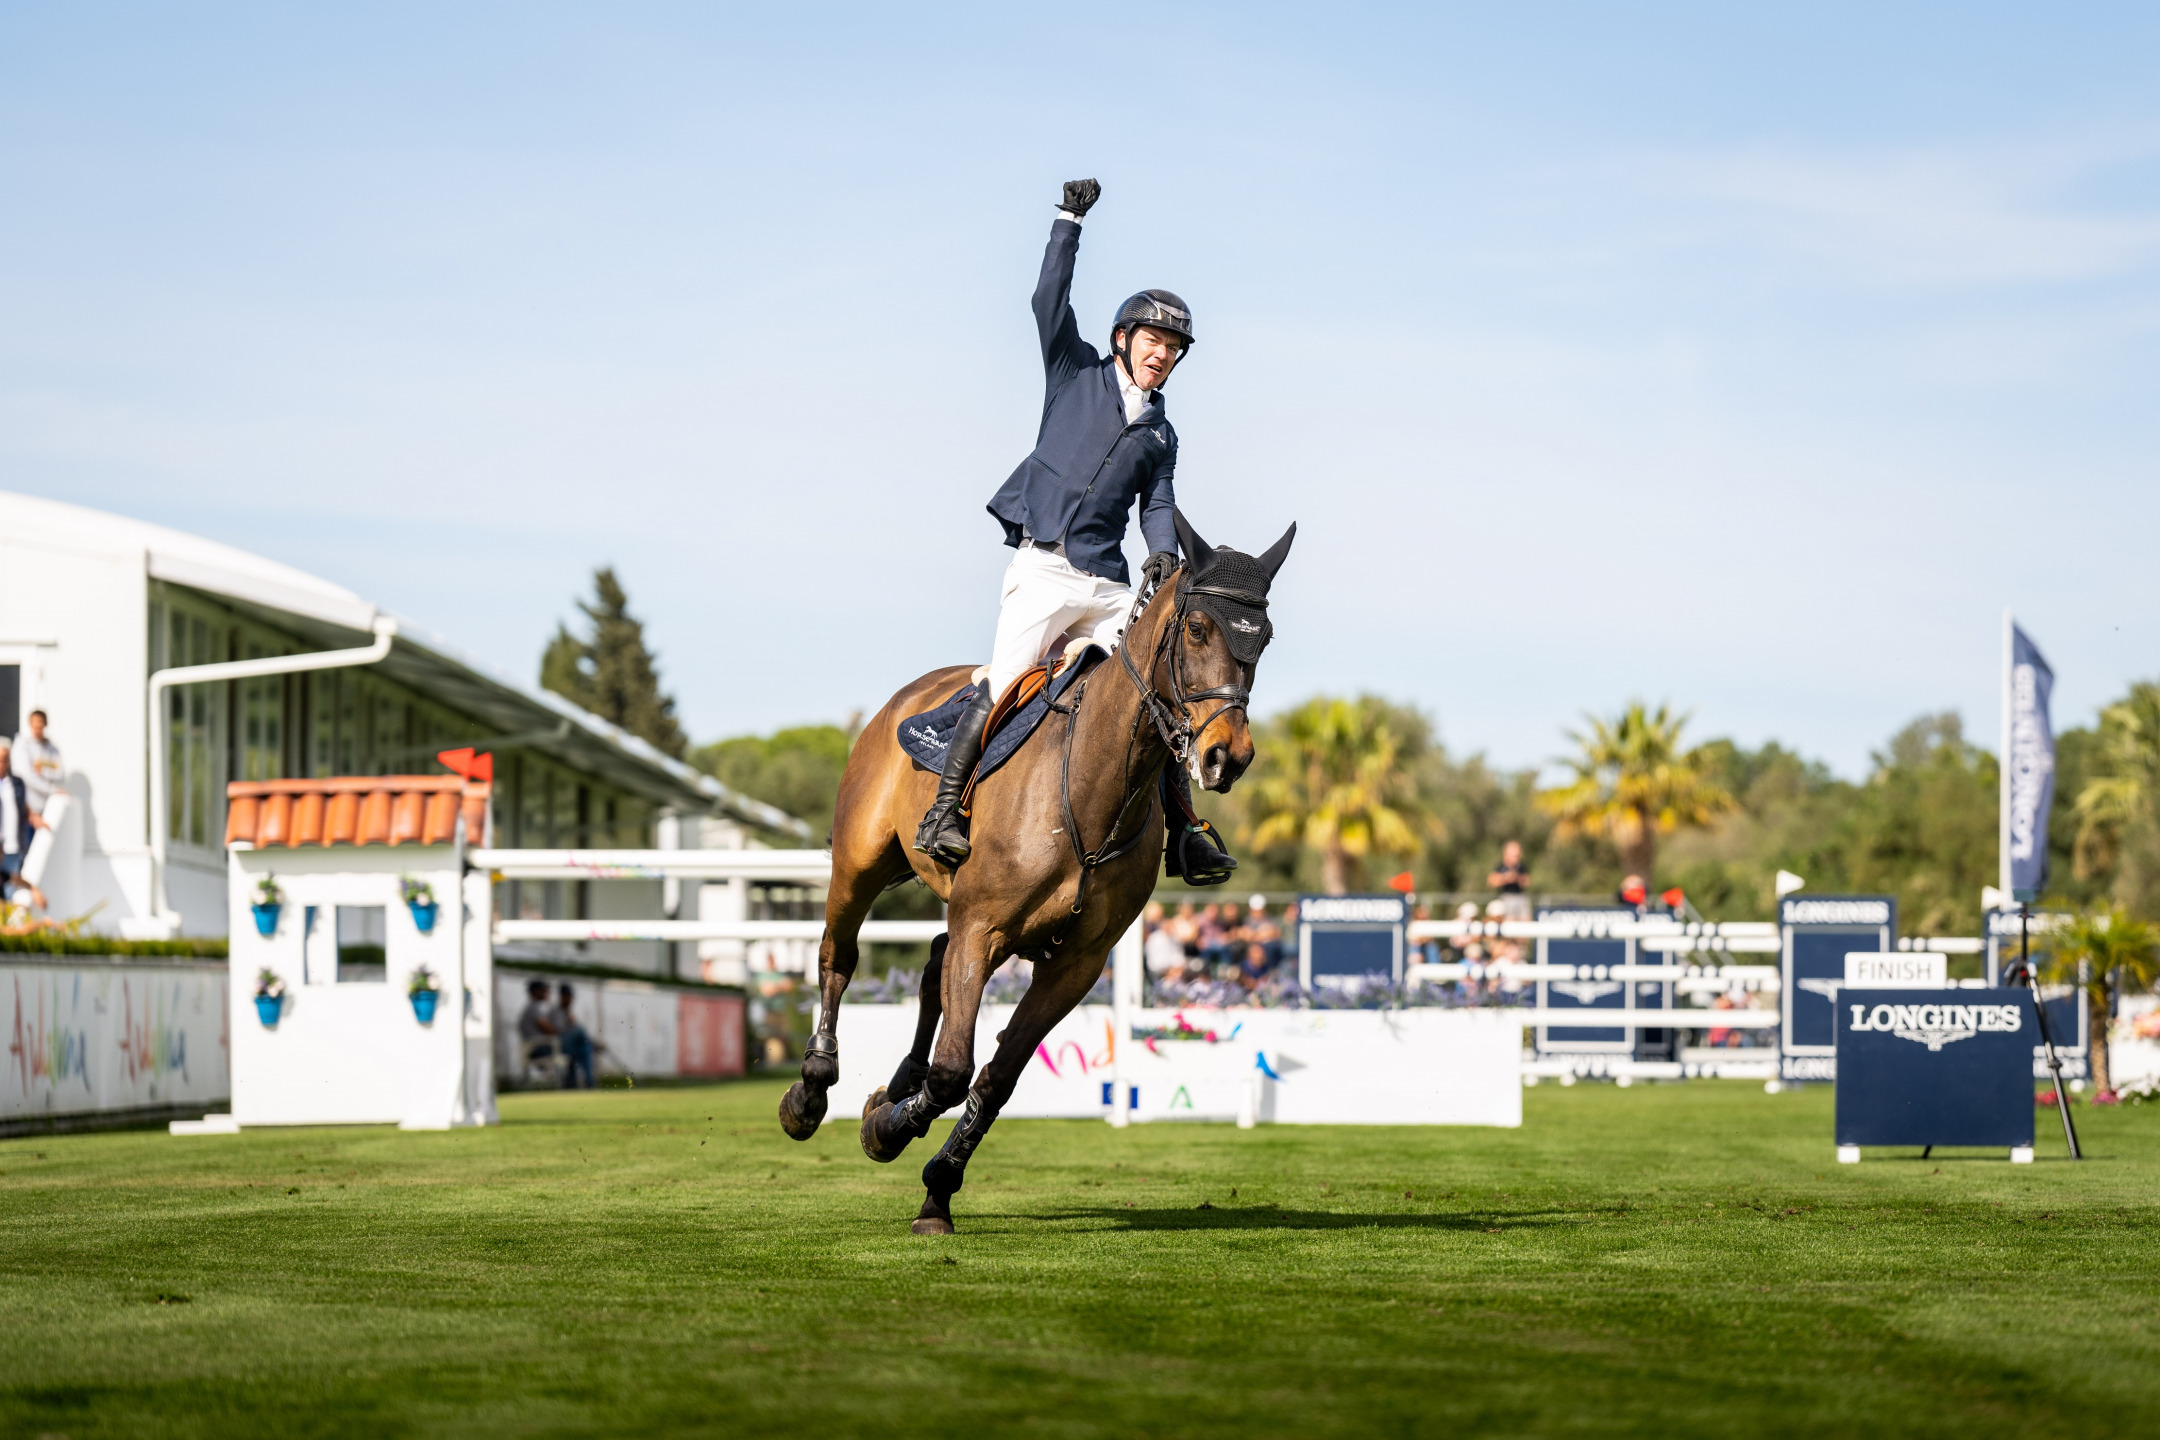 Michael Pender, the winner of Andalucía GP Final. Photo is by Equus Media